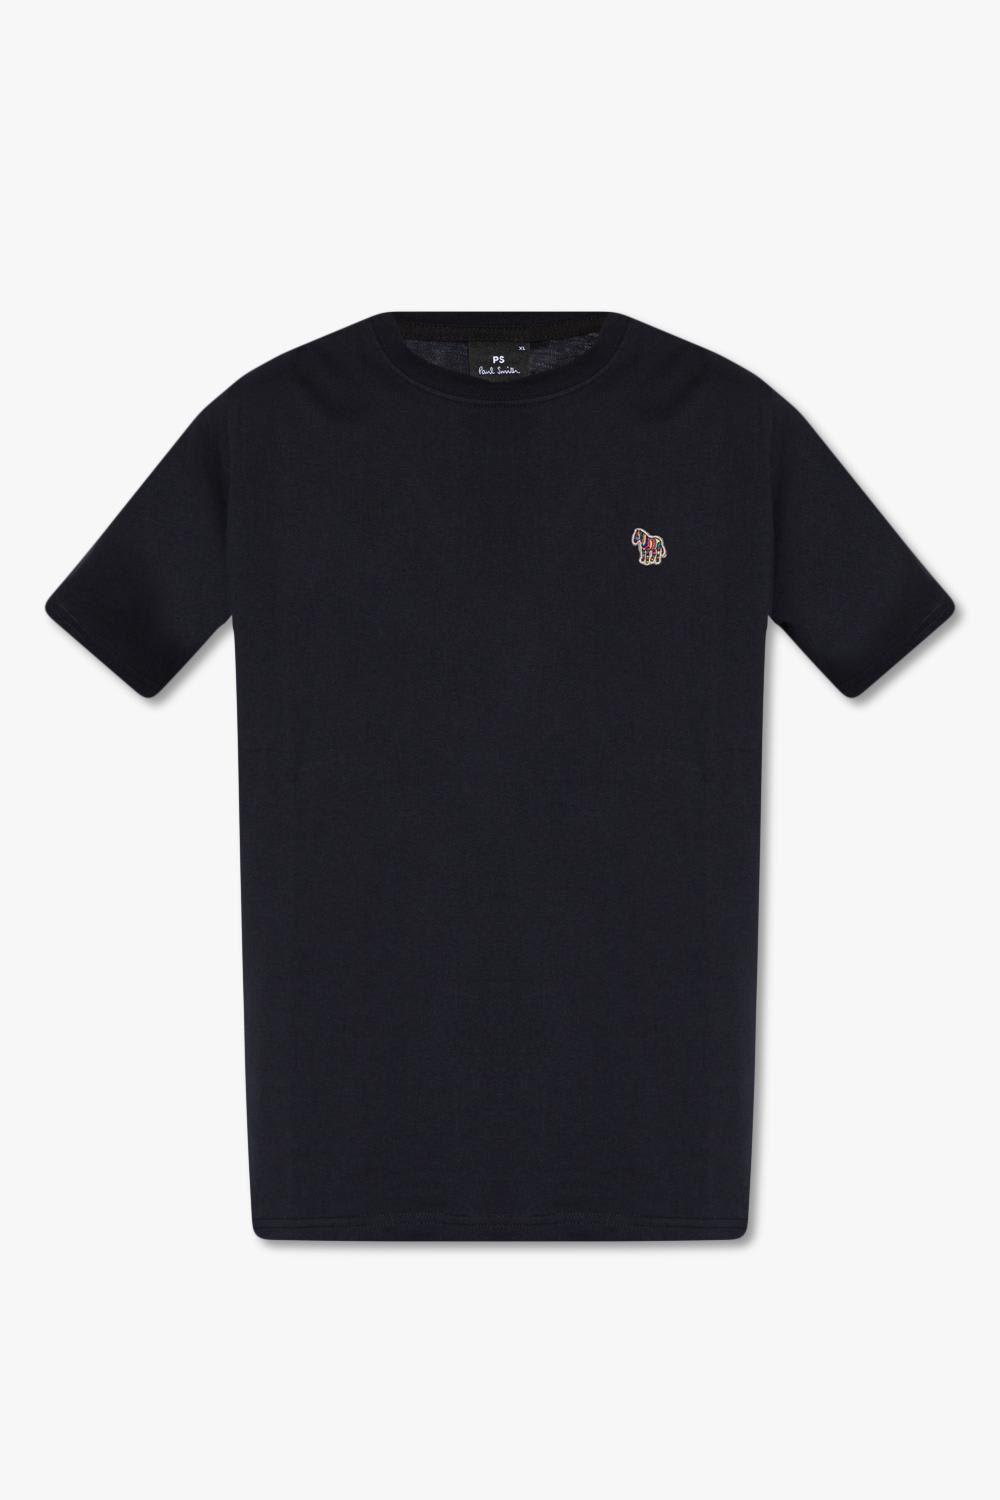 Paul Smith T-shirt With Patch In Black